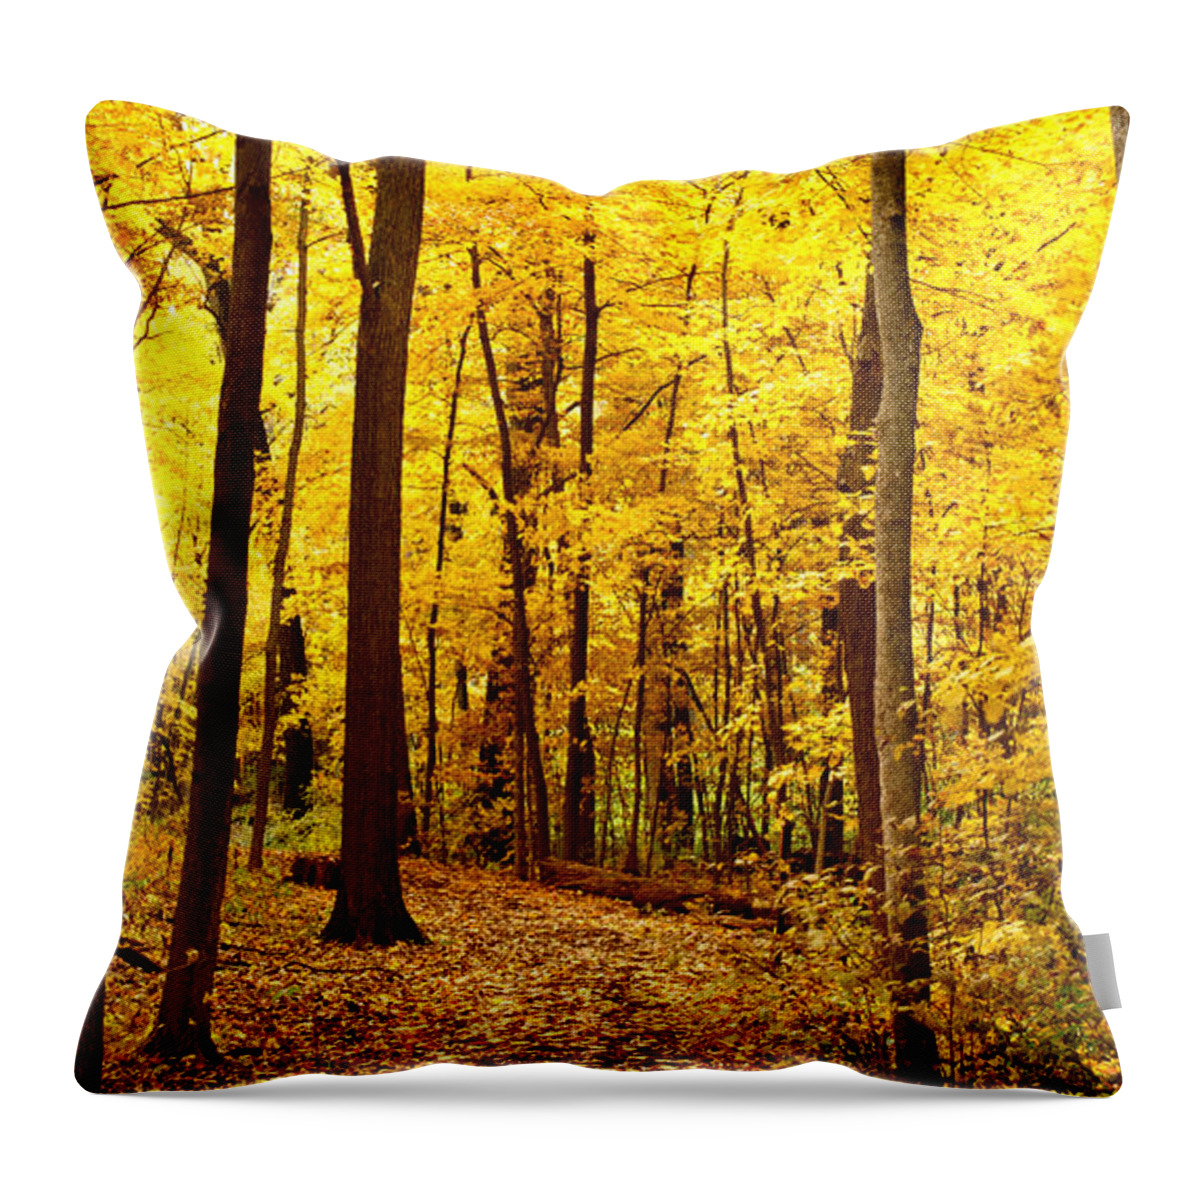 Autumn Throw Pillow featuring the photograph Golden Path by Valerie Fuqua